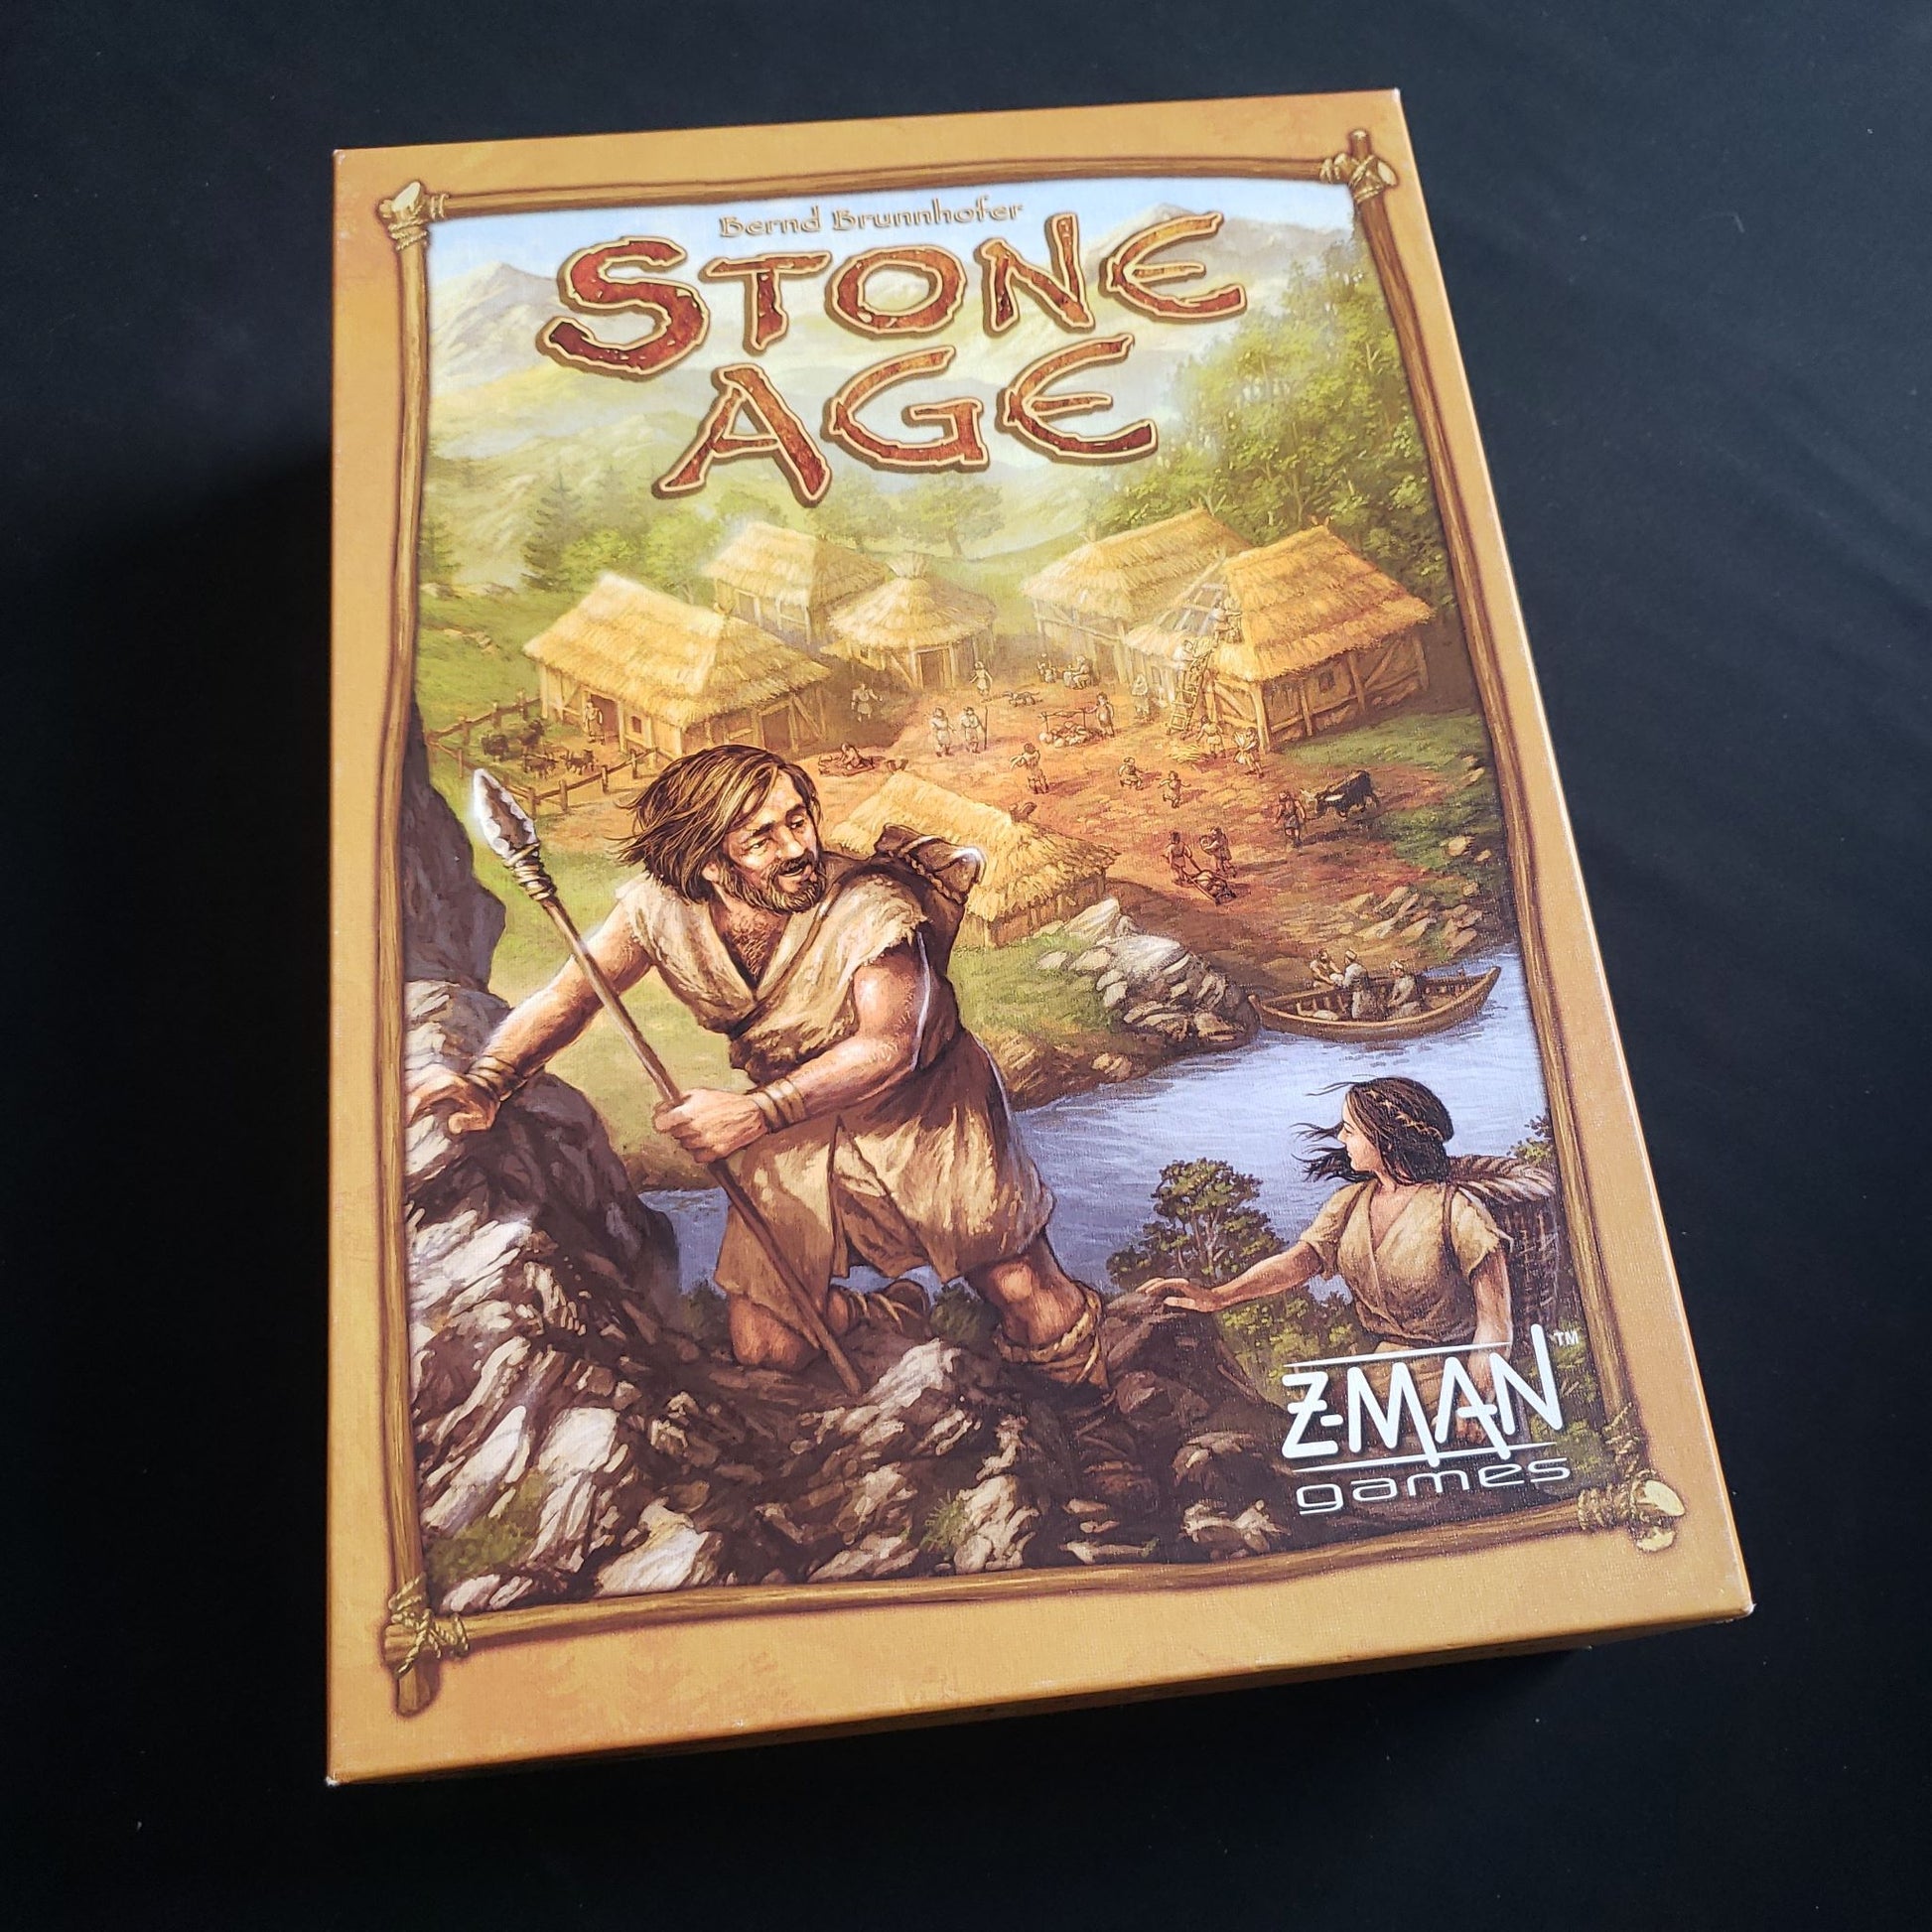 Image shows the front cover of the box of the Stone Age board game